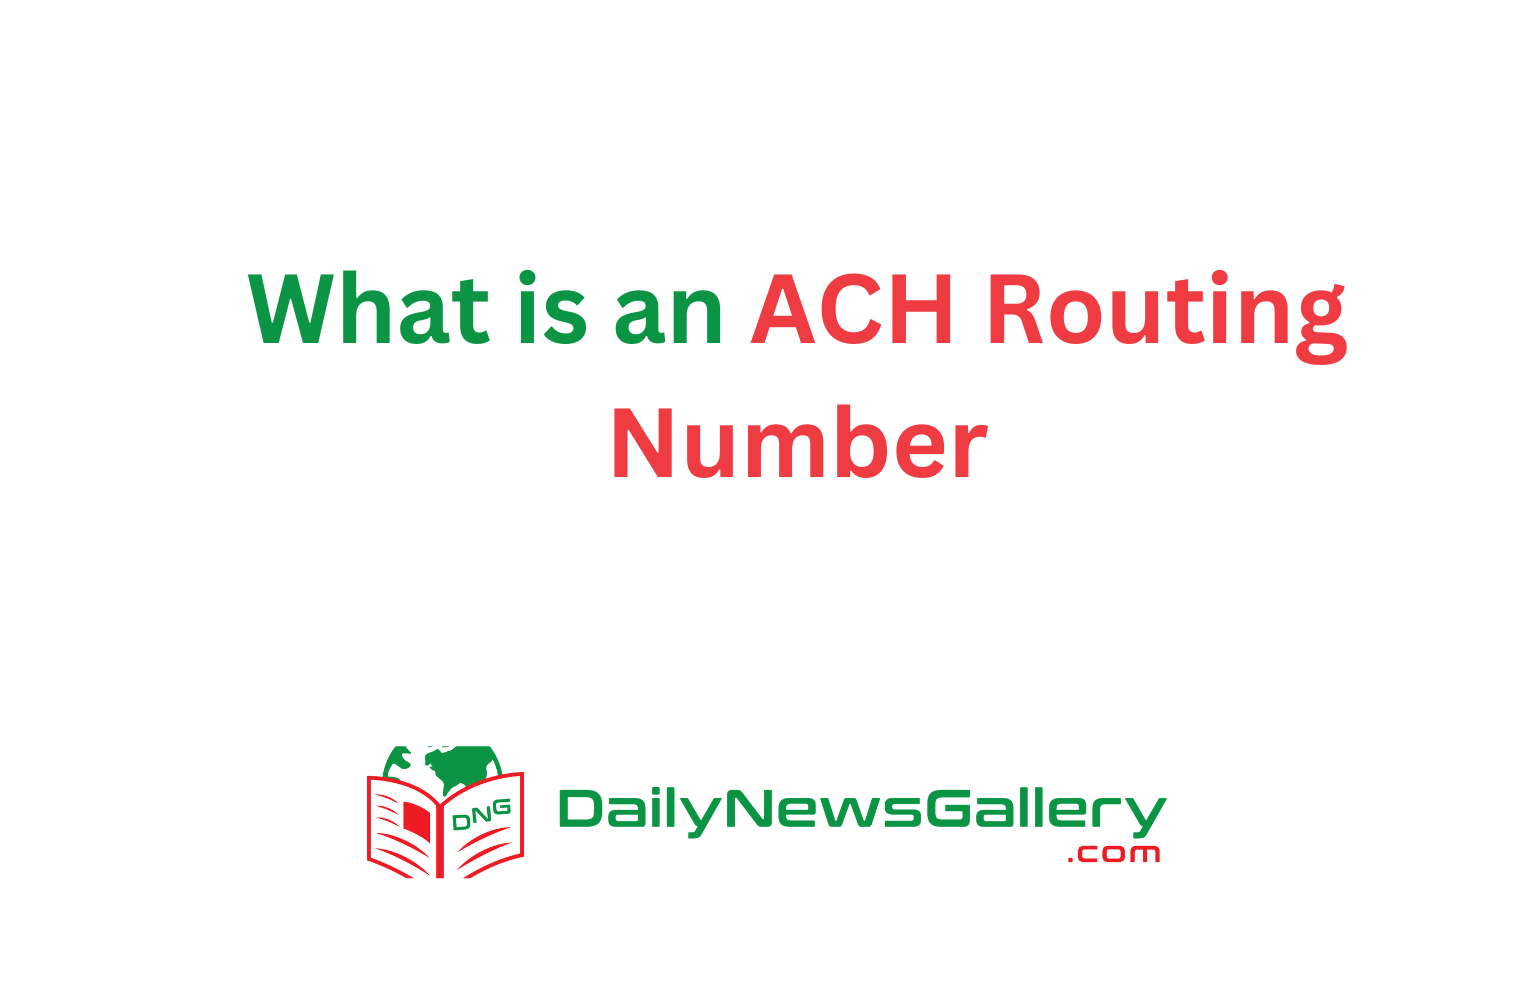 What is an ACH Routing Number